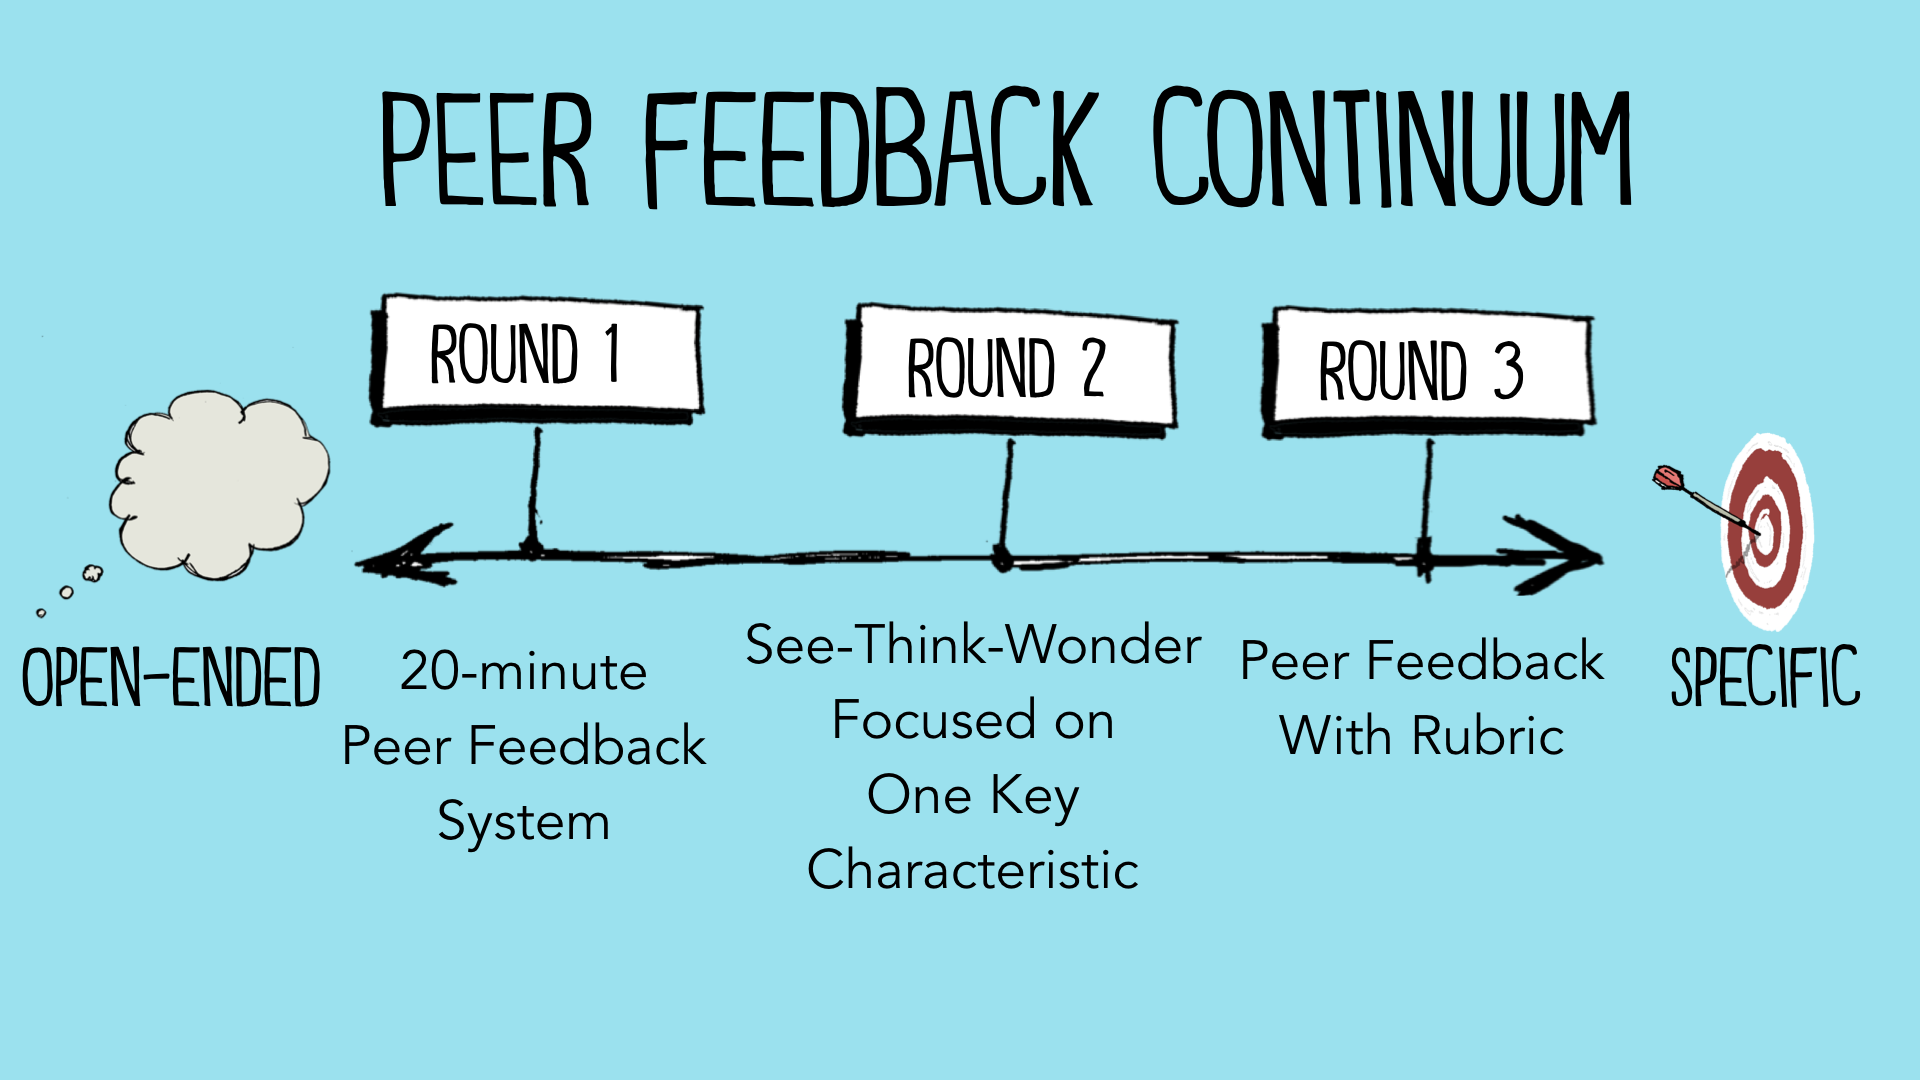 Seven Strategies for Getting the Most Out of Peer Feedback in the Classroom